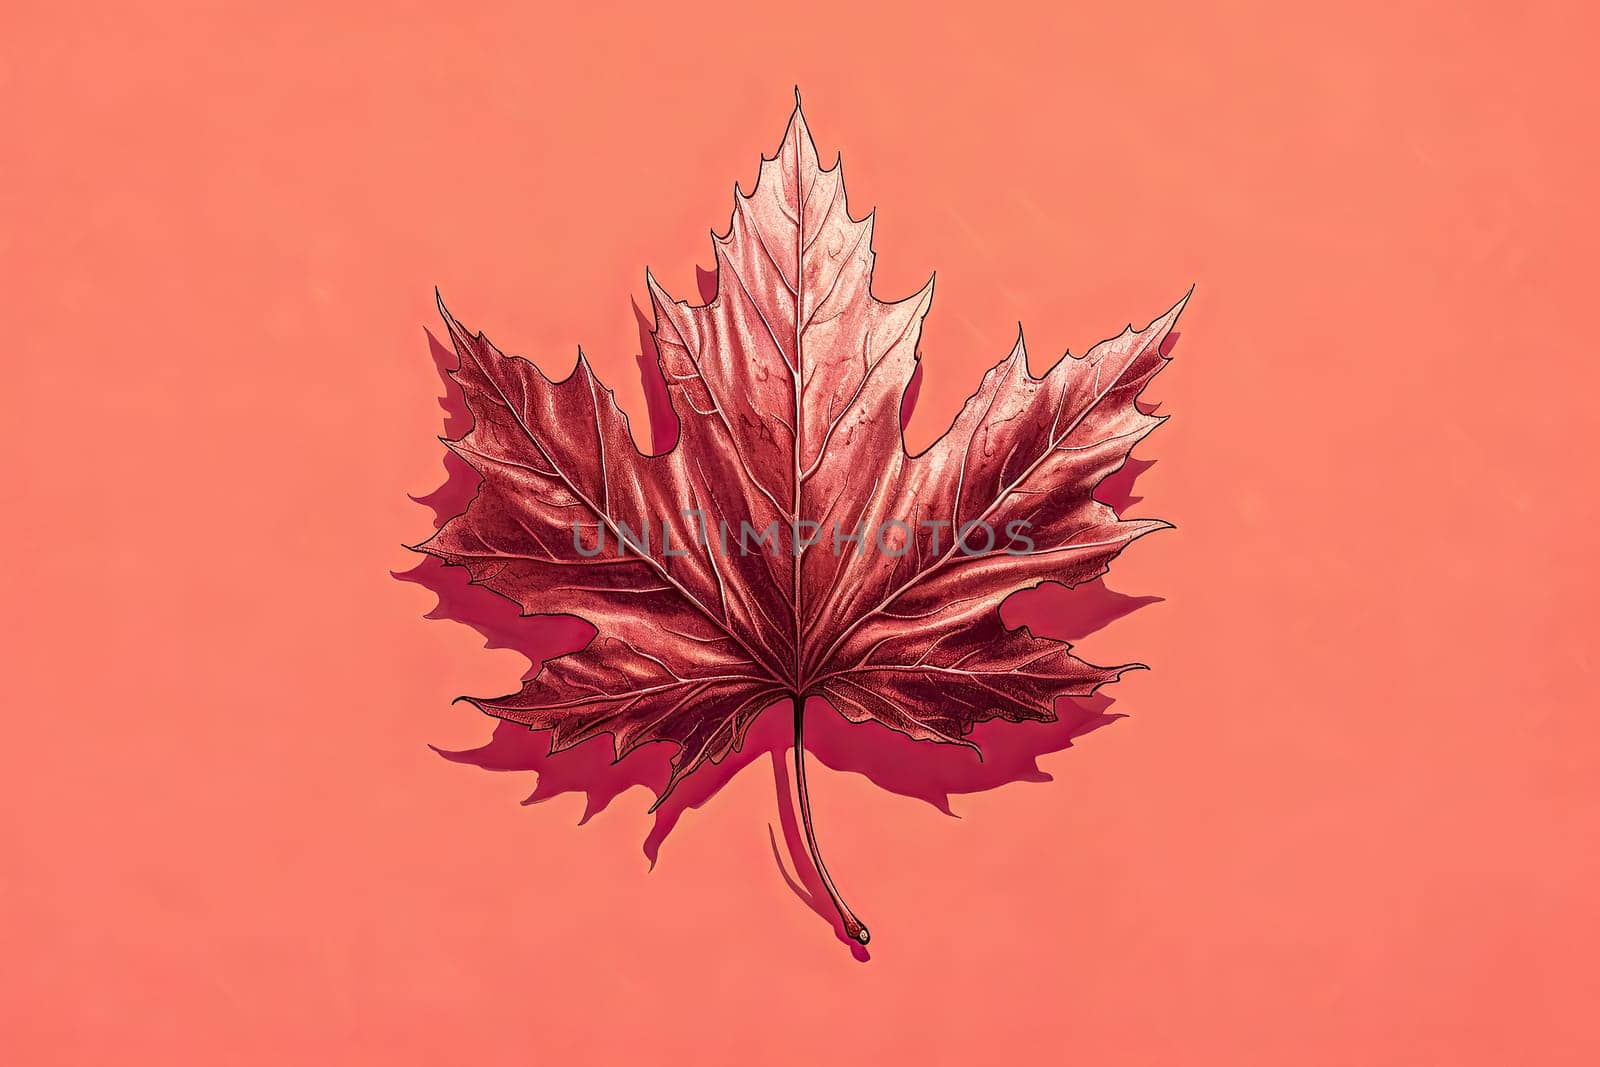 A leaf with a red stem and veins. The leaf is on a brown background. The leaf is the main focus of the image